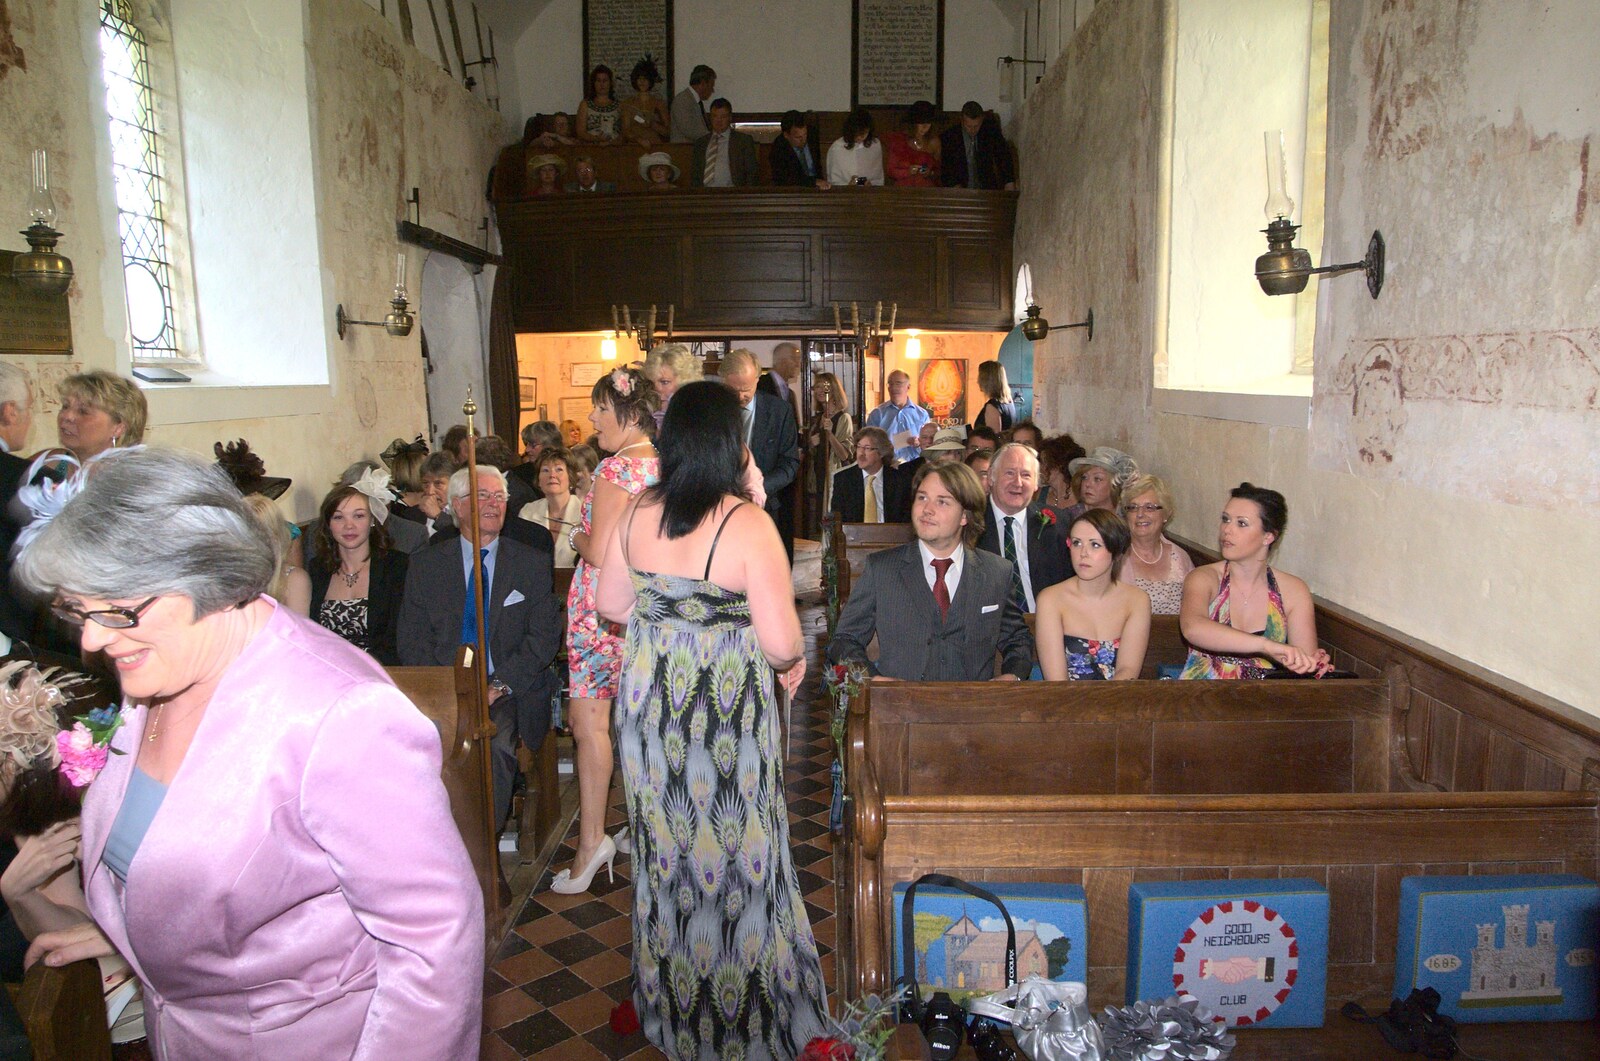 The church fills up from Rob and Wilma's Wedding, Thornham and Thrandeston, Suffolk - 6th August 2011